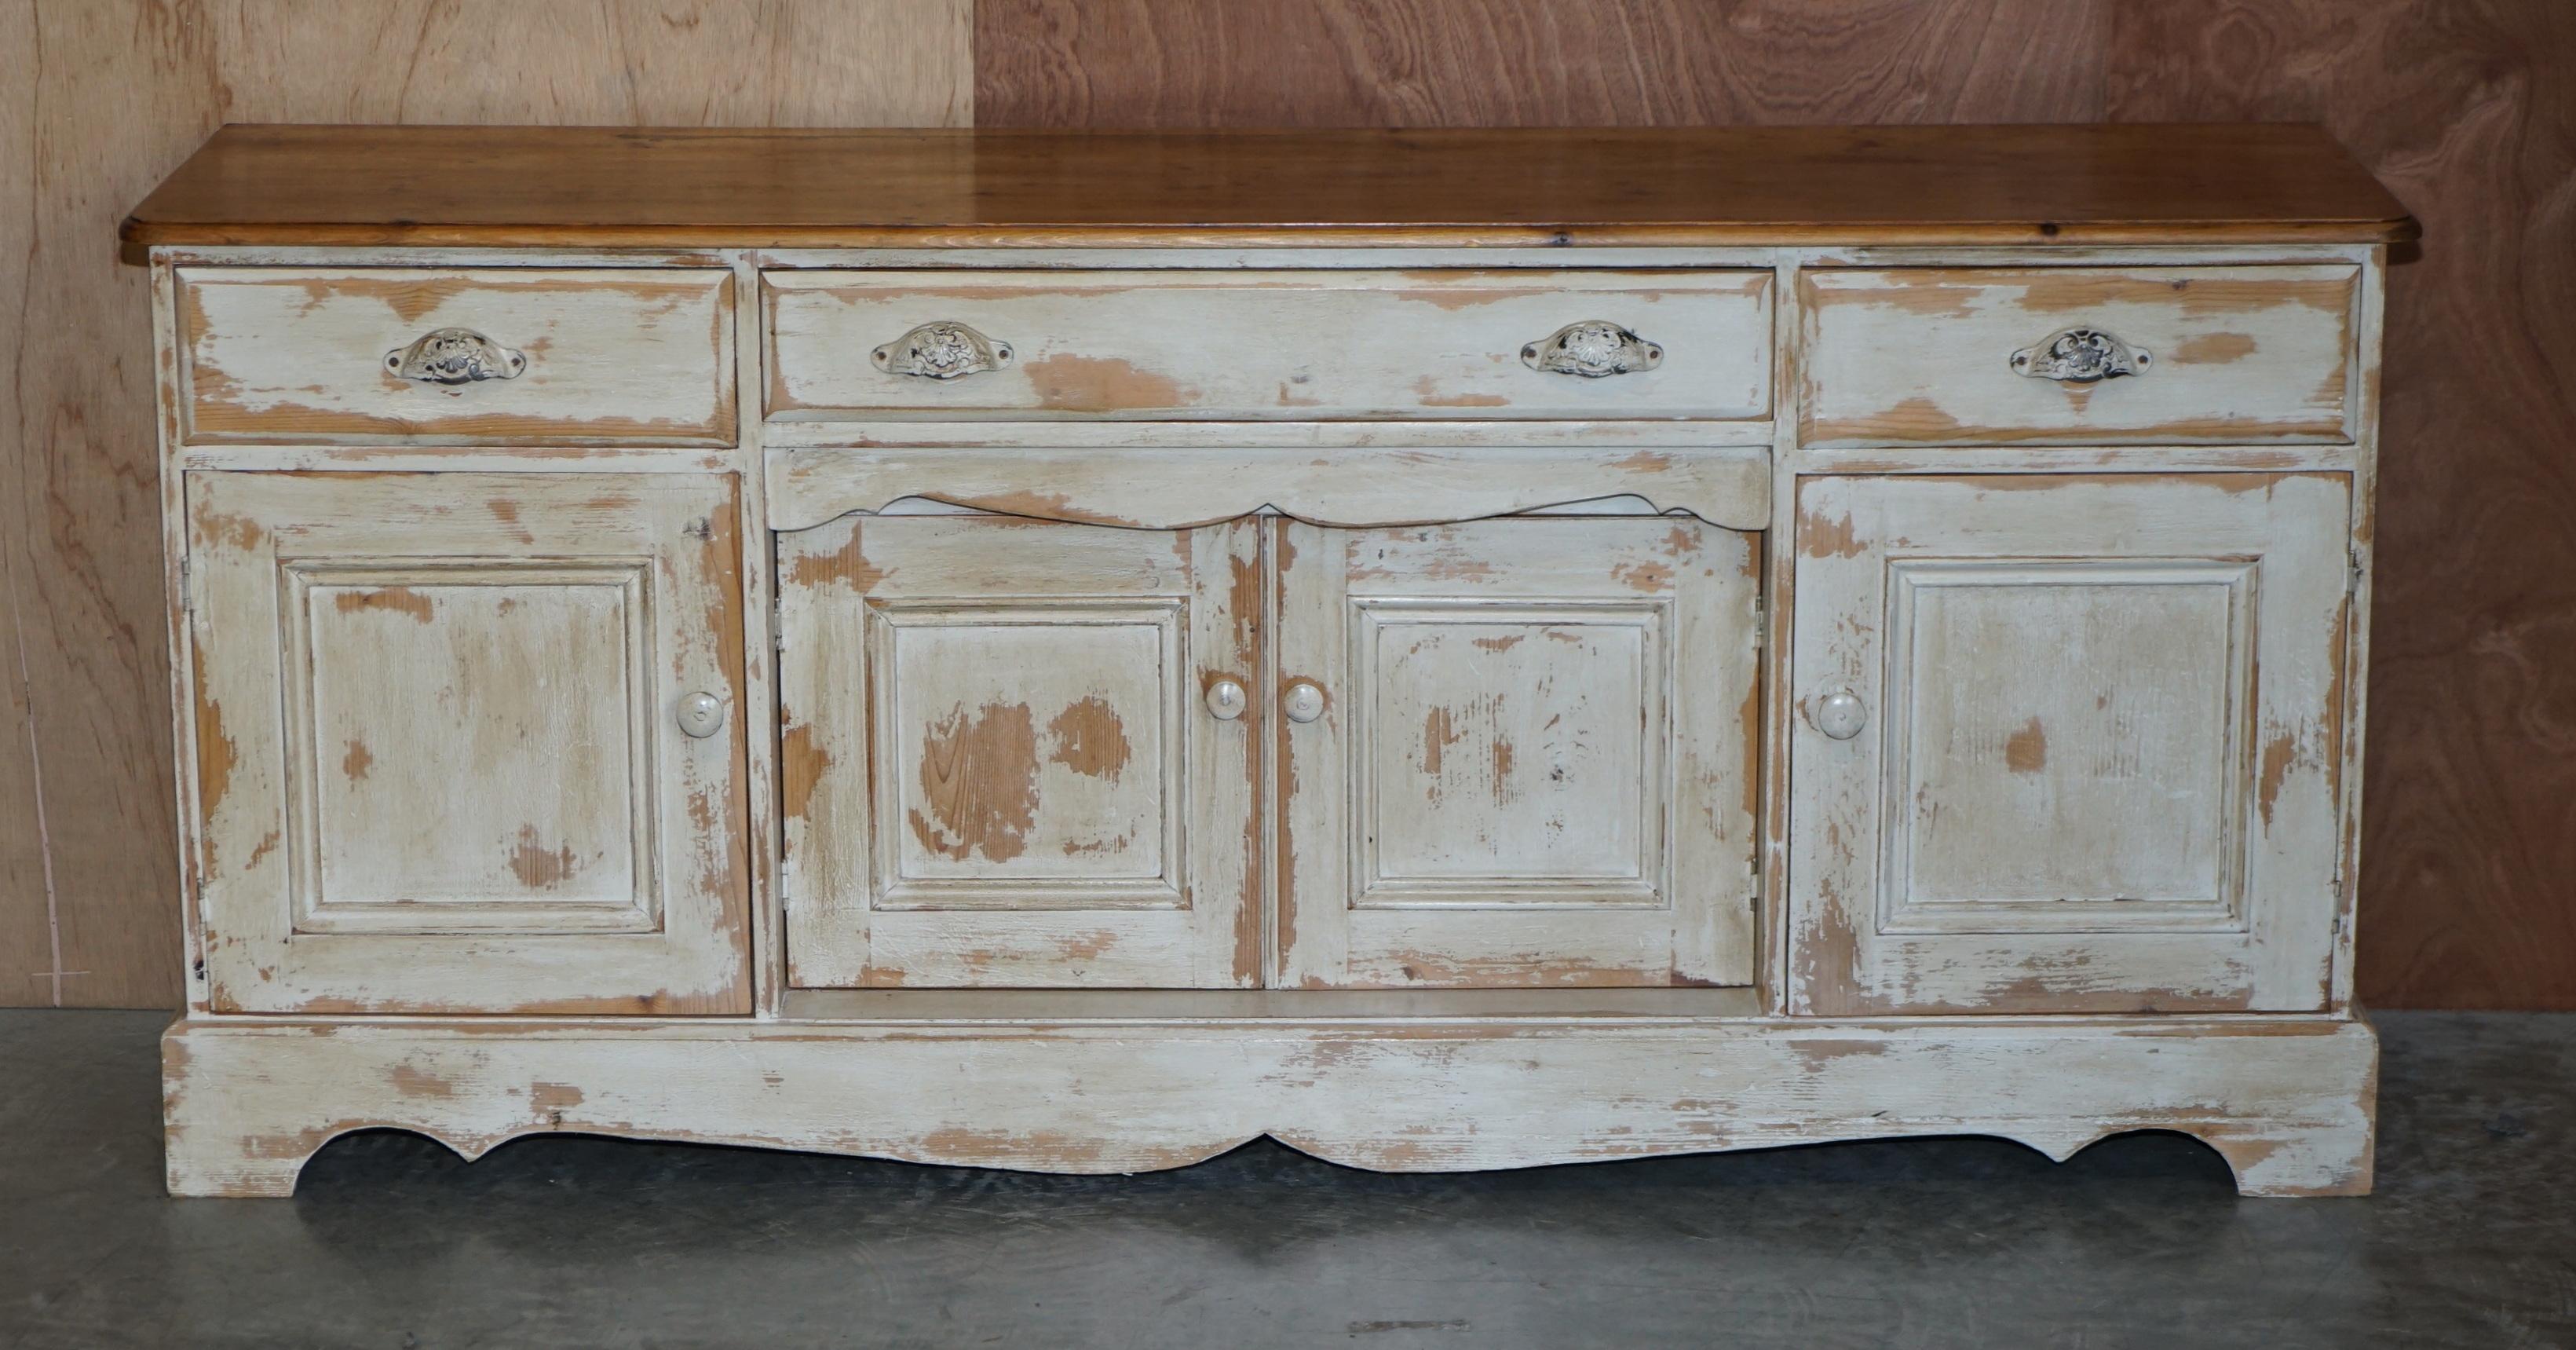 We are delighted to offer for sale this very nice made in Hungry hand painted and antiqued sideboard with drawers 

A good looking and well made piece that has been nicely aged. It has a bit of age to it but not much, the finish has been done very